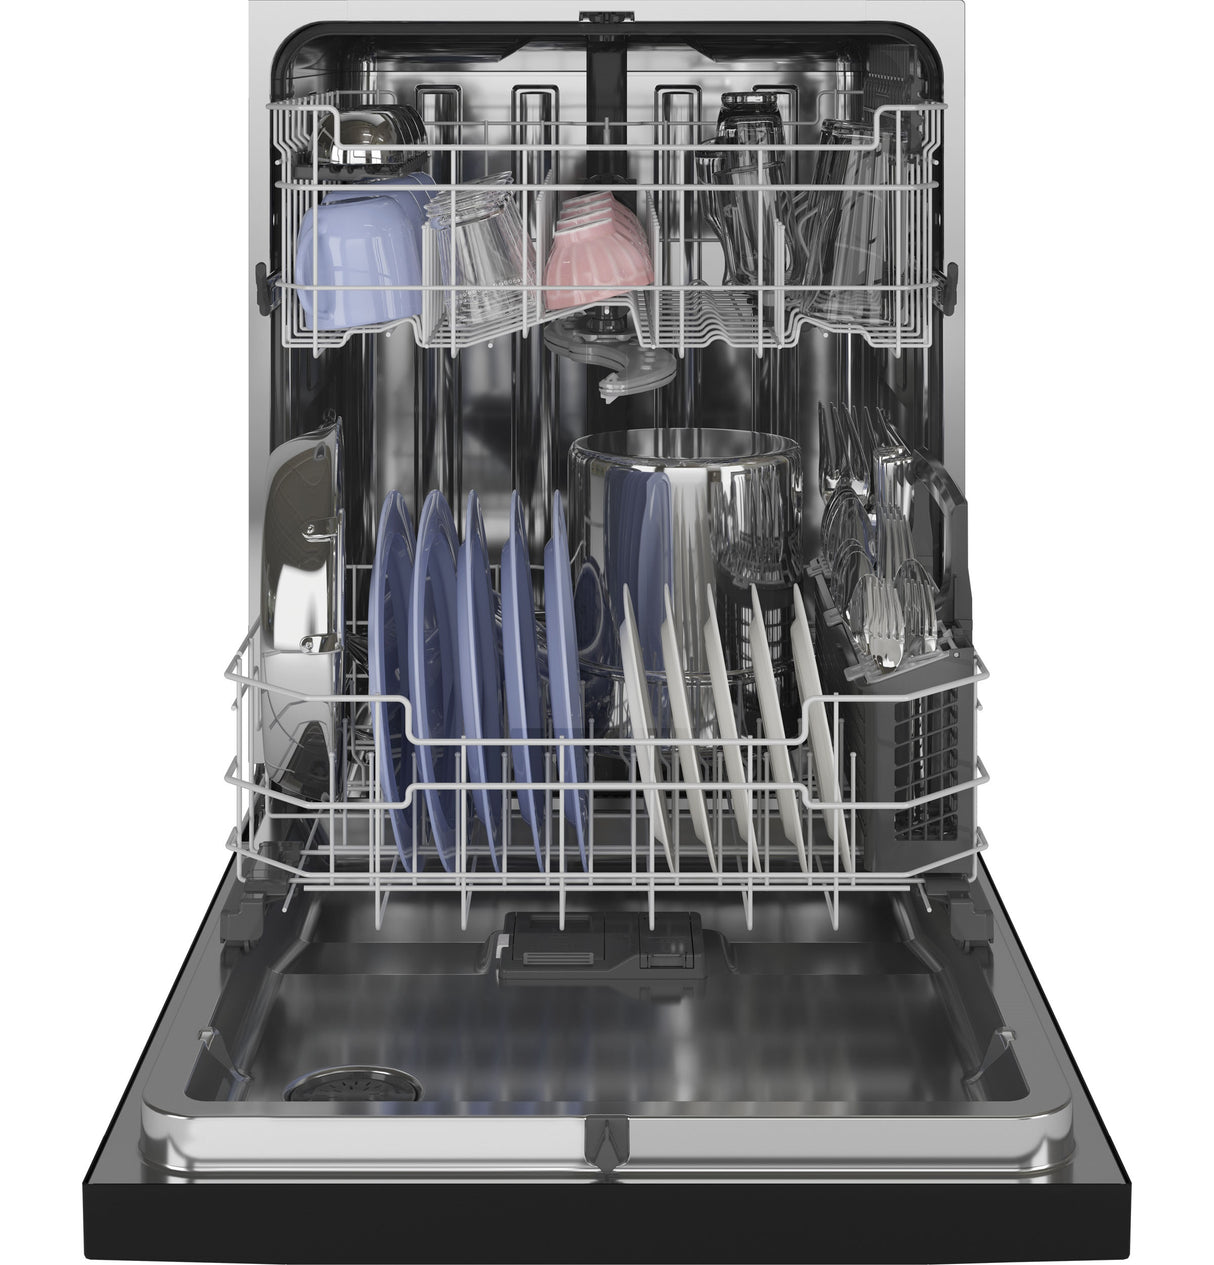 GE(R) ENERGY STAR(R) Top Control with Stainless Steel Interior Dishwasher with Sanitize Cycle & Dry Boost with Fan Assist - (GDT645SGNBB)